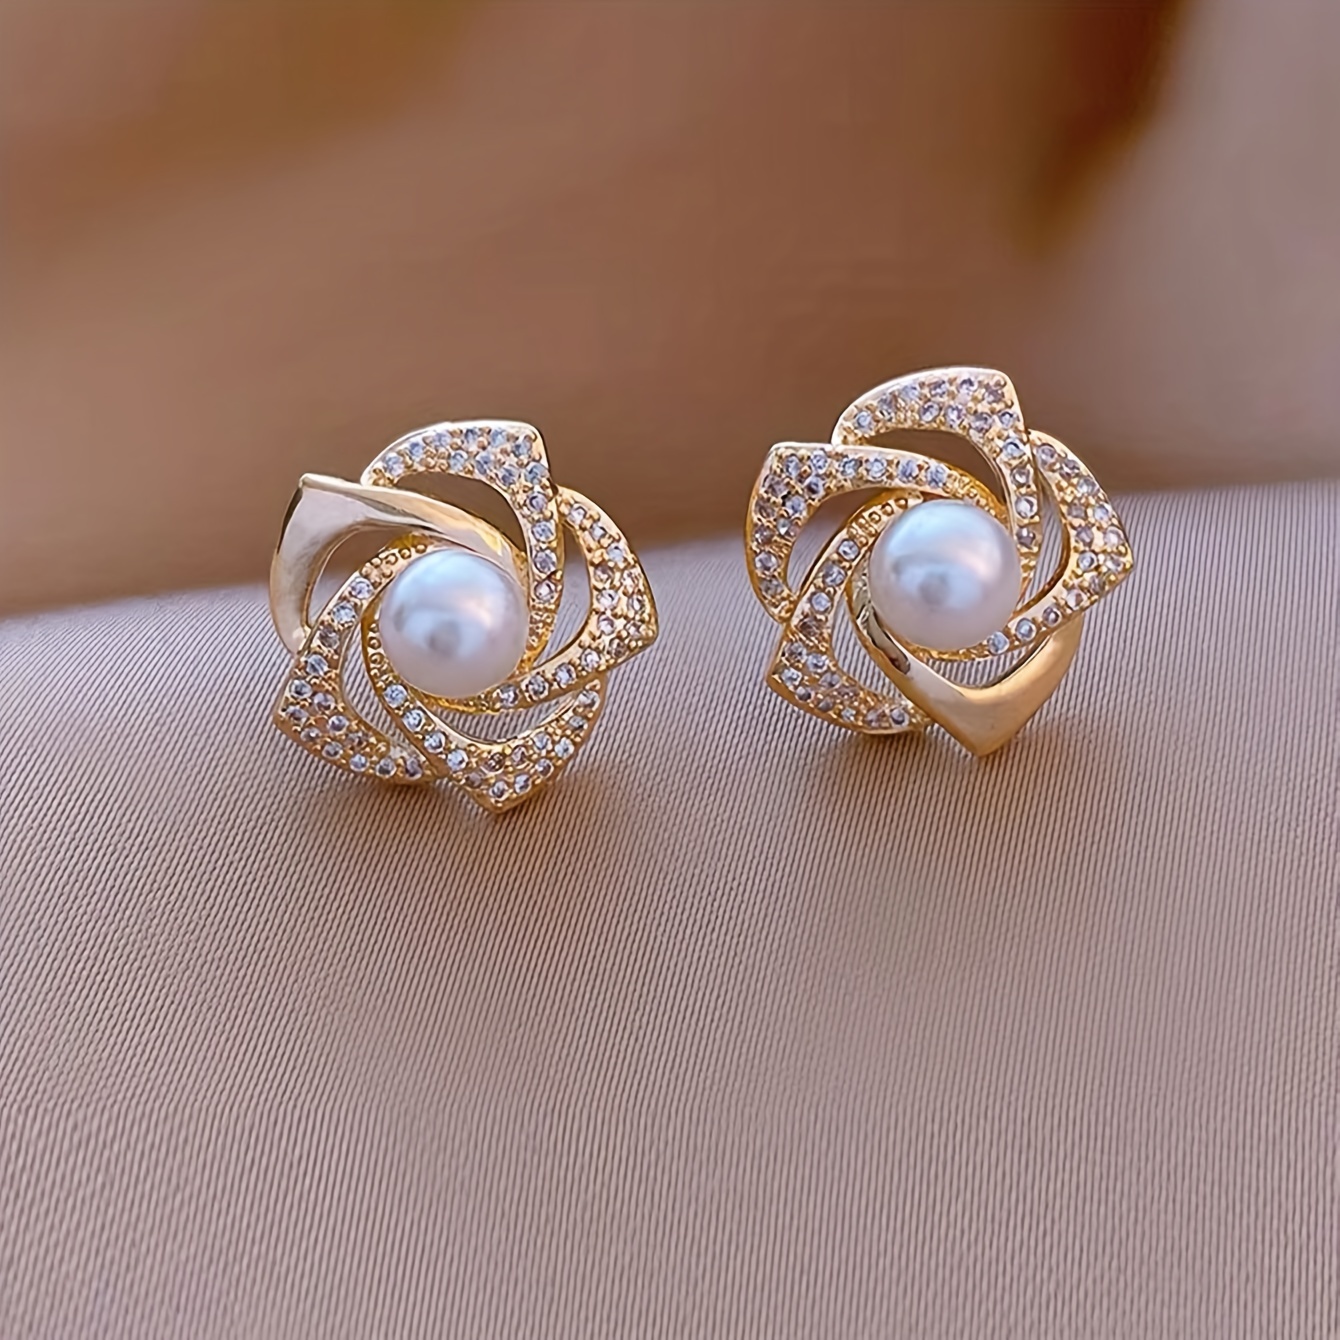 

Exquisite Hollow Flower Design Stud Earrings Zinc Alloy Jewelry Embellished With Imitation Pearl Vintage Elegant Style Female Gift